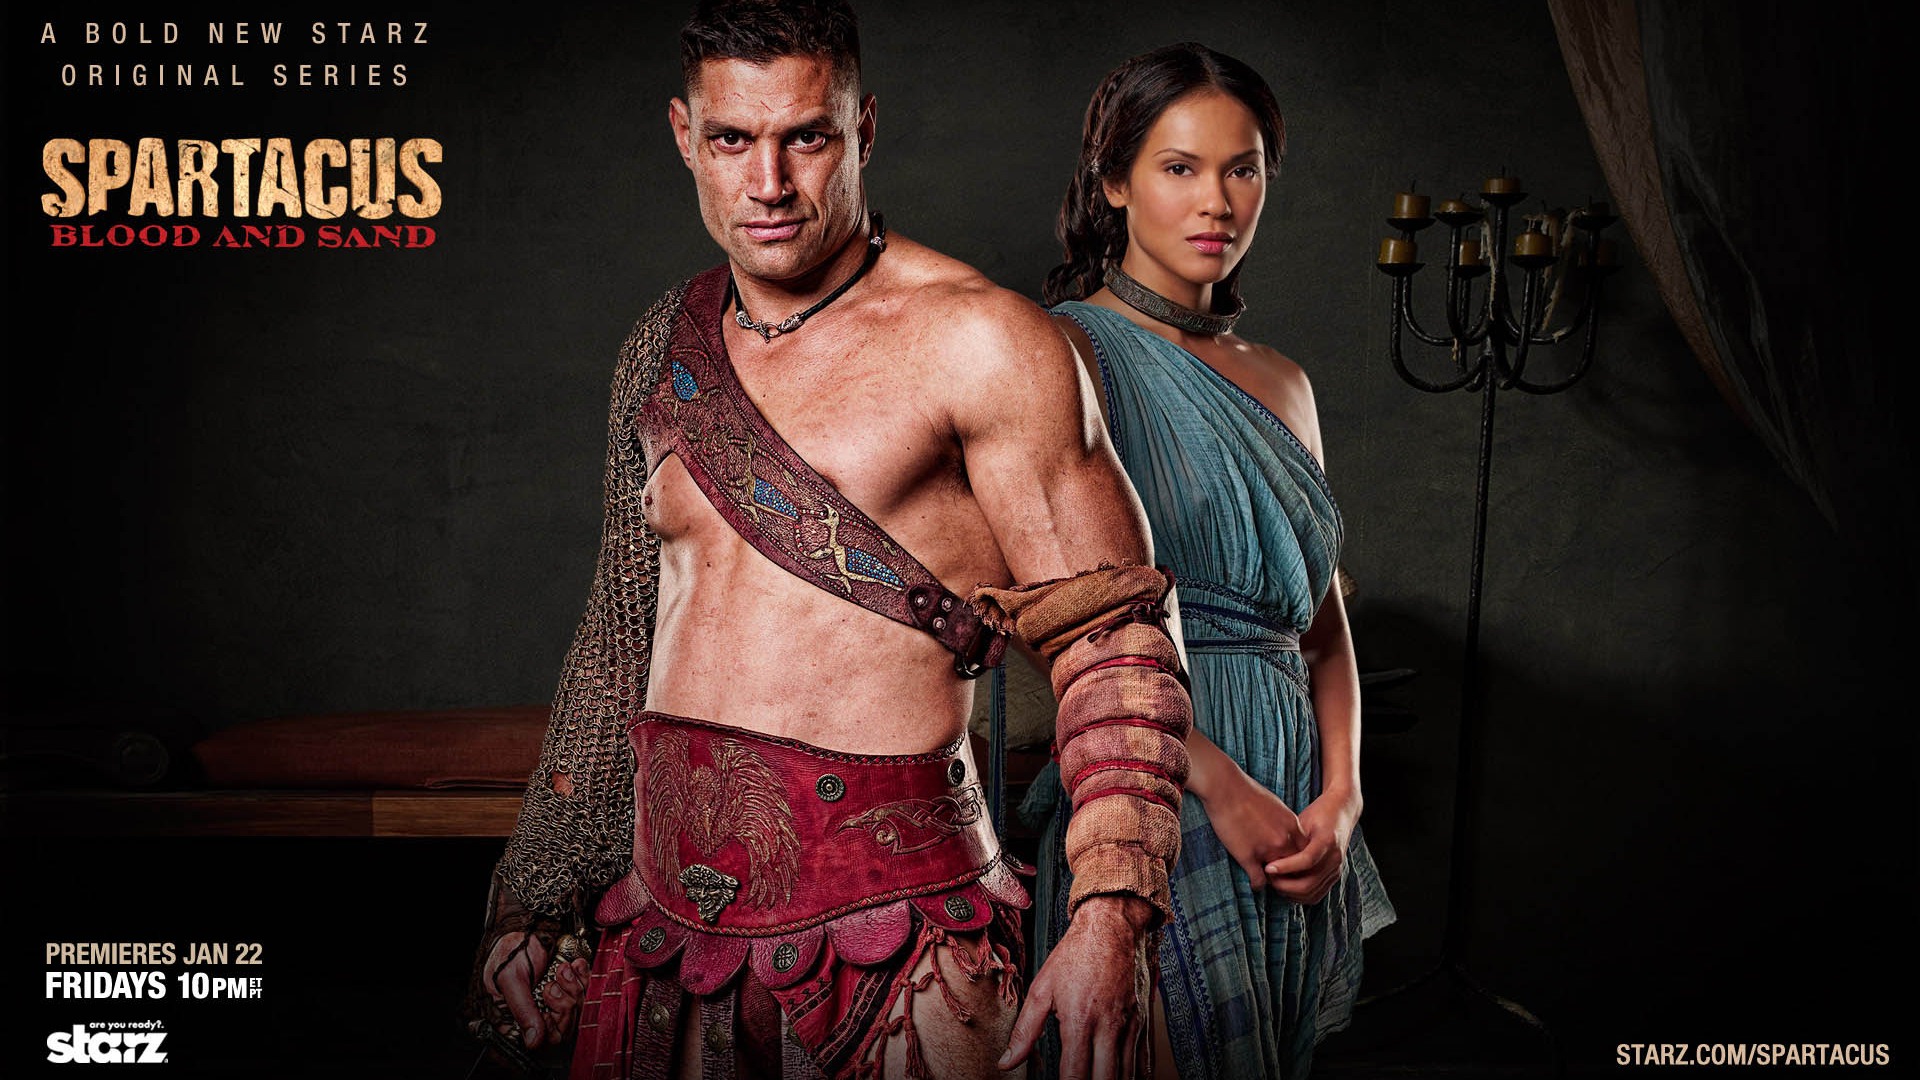 Spartacus: Blood and Sand HD wallpapers #4 - 1920x1080